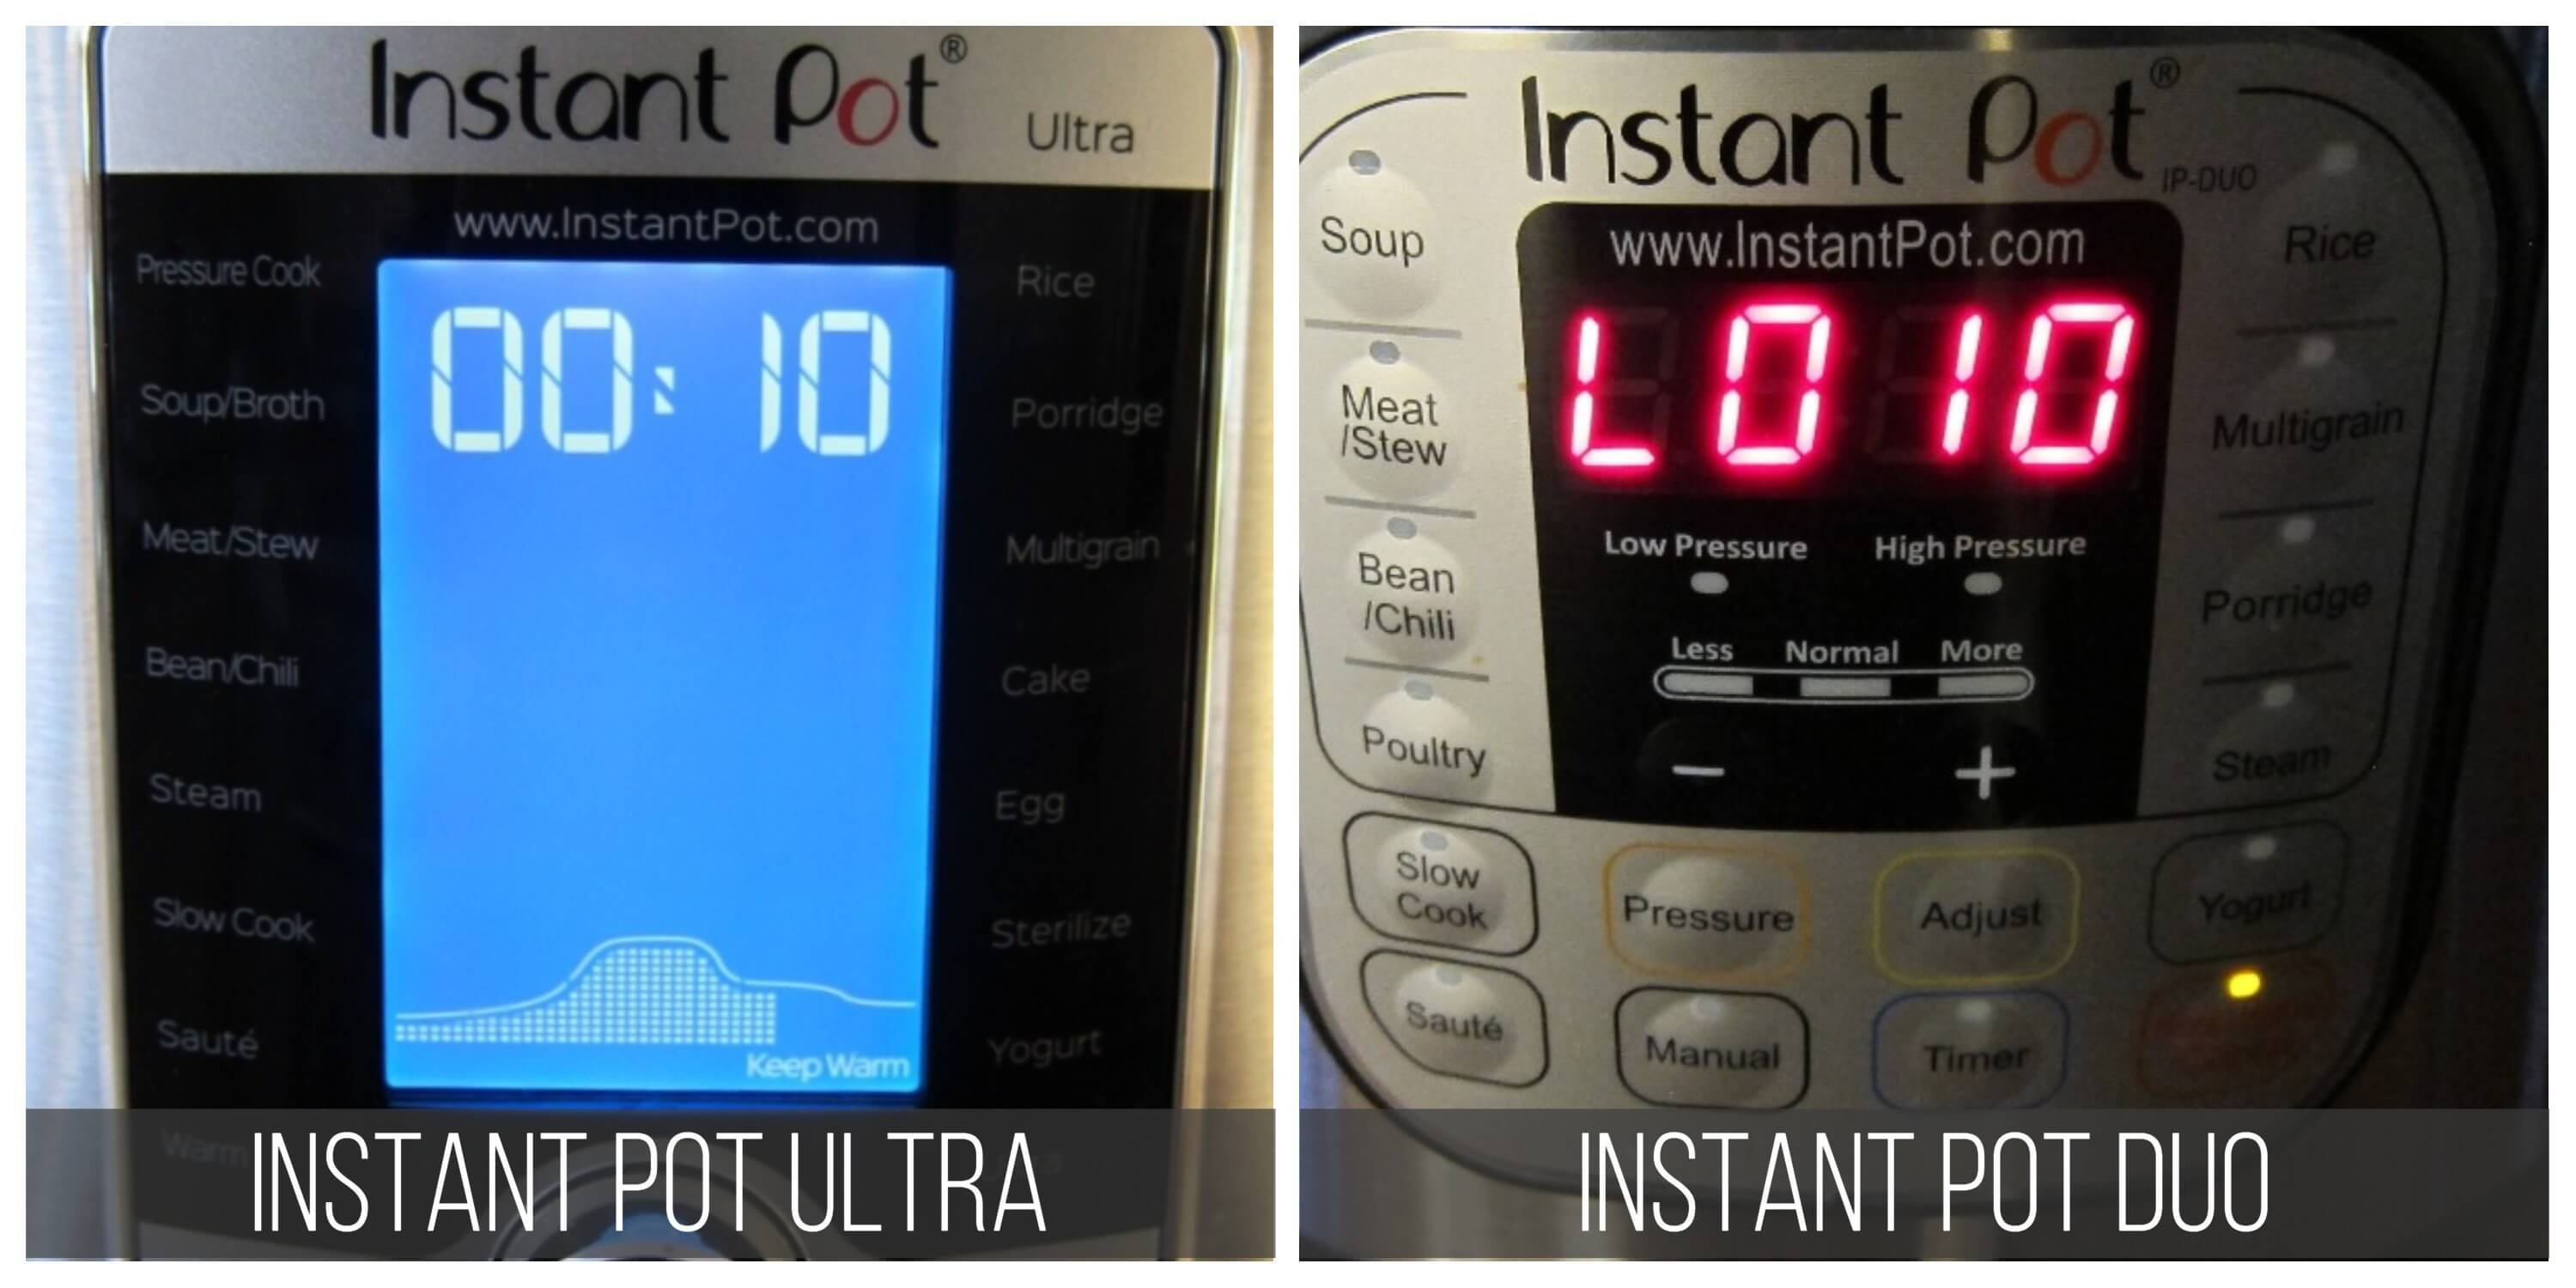 Instant Pot Ultra and Duo 10 minute Natural Release (NPR) Paint the Kitchen Red